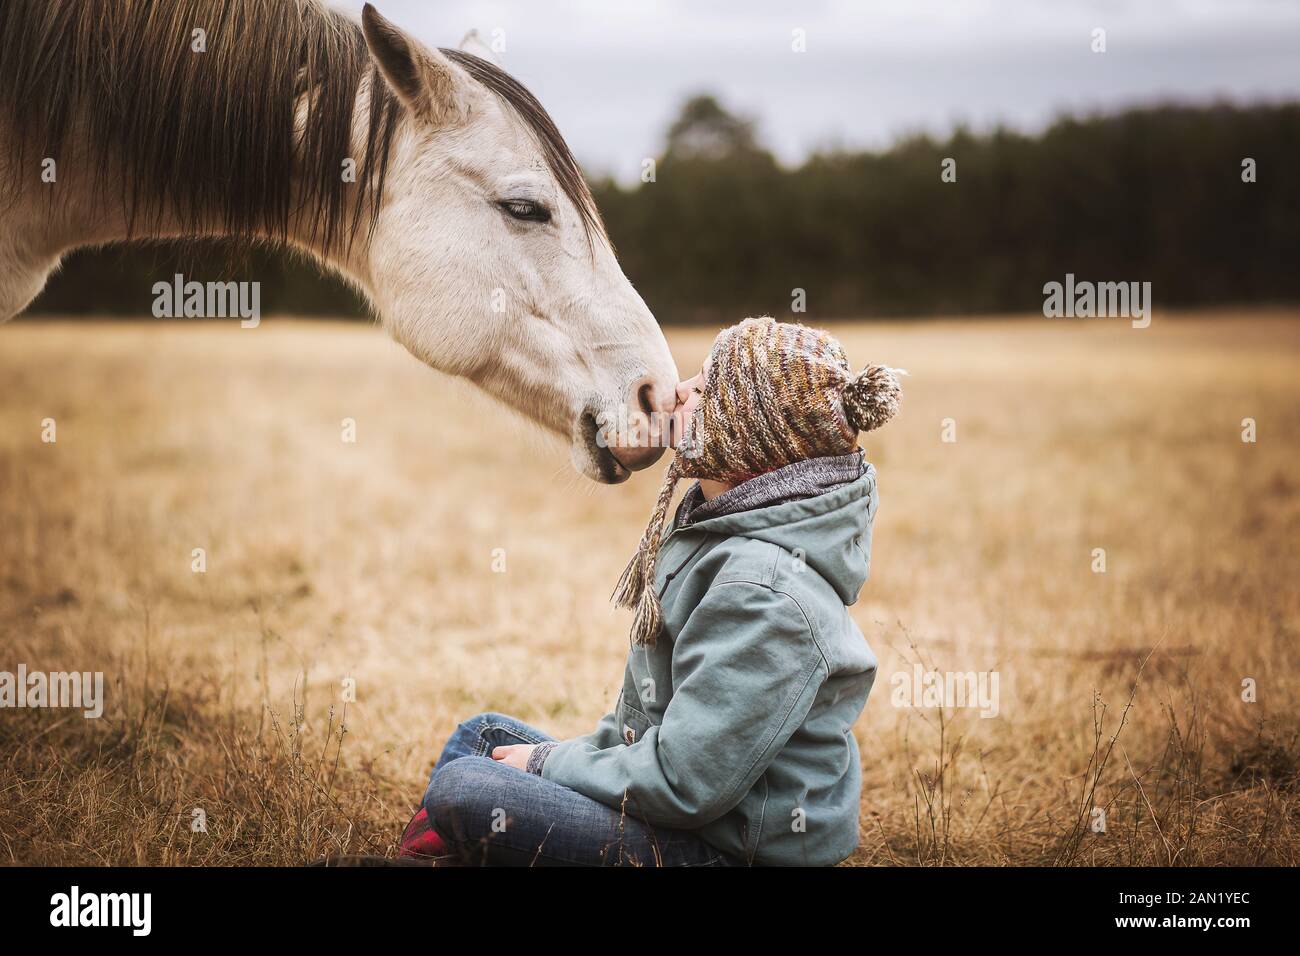 young girl kisses white horse on nose while sitting on ground Stock Photo